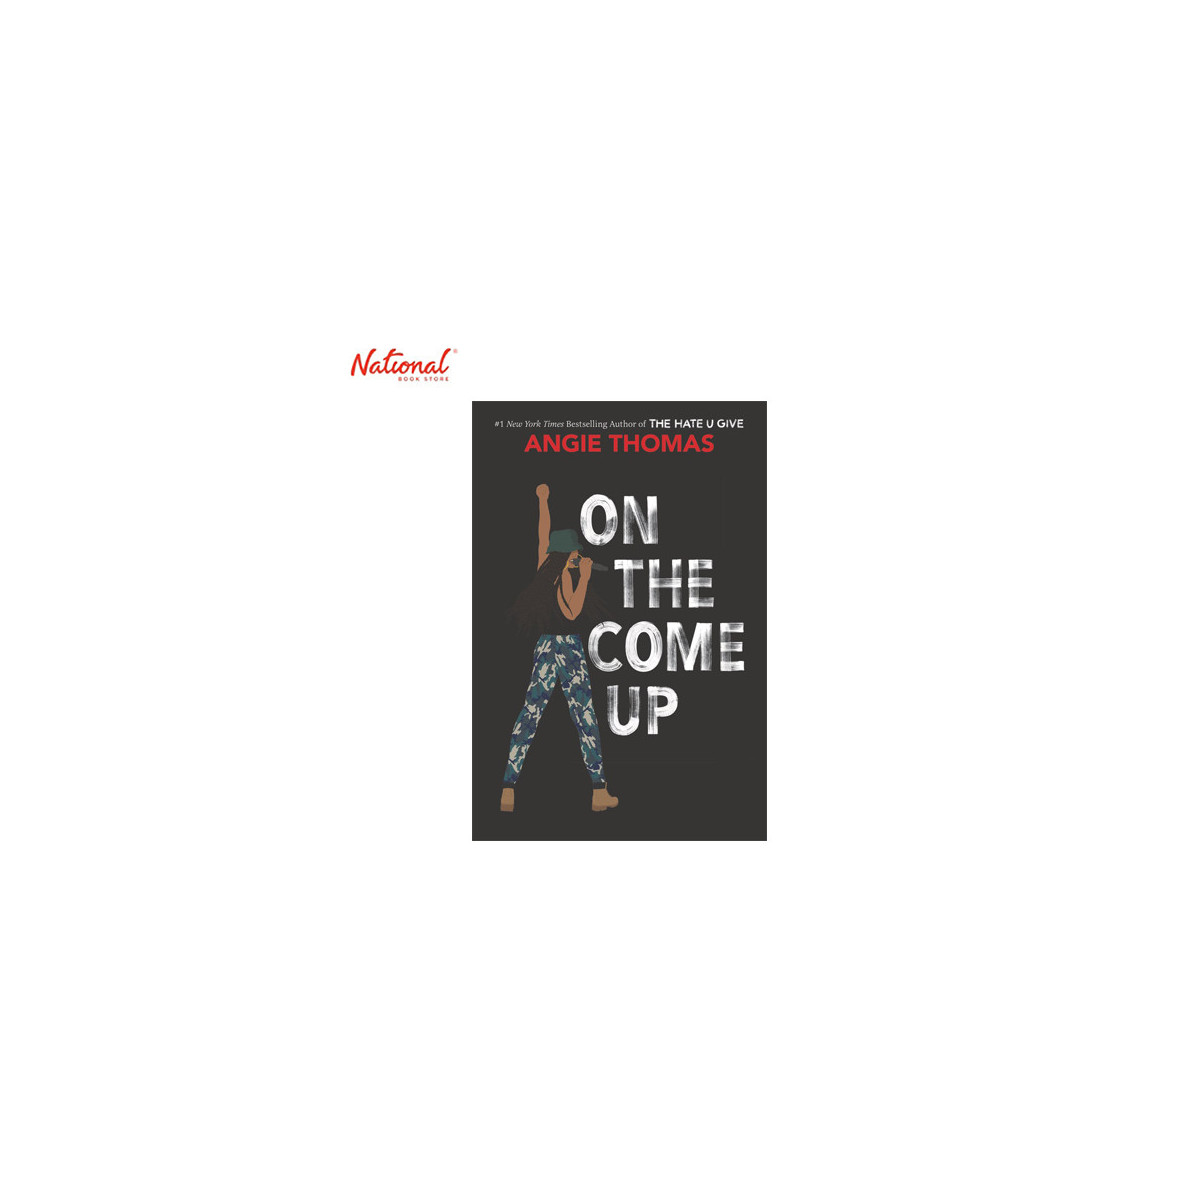 On the Come Up Trade Paperback by Angie Thomas